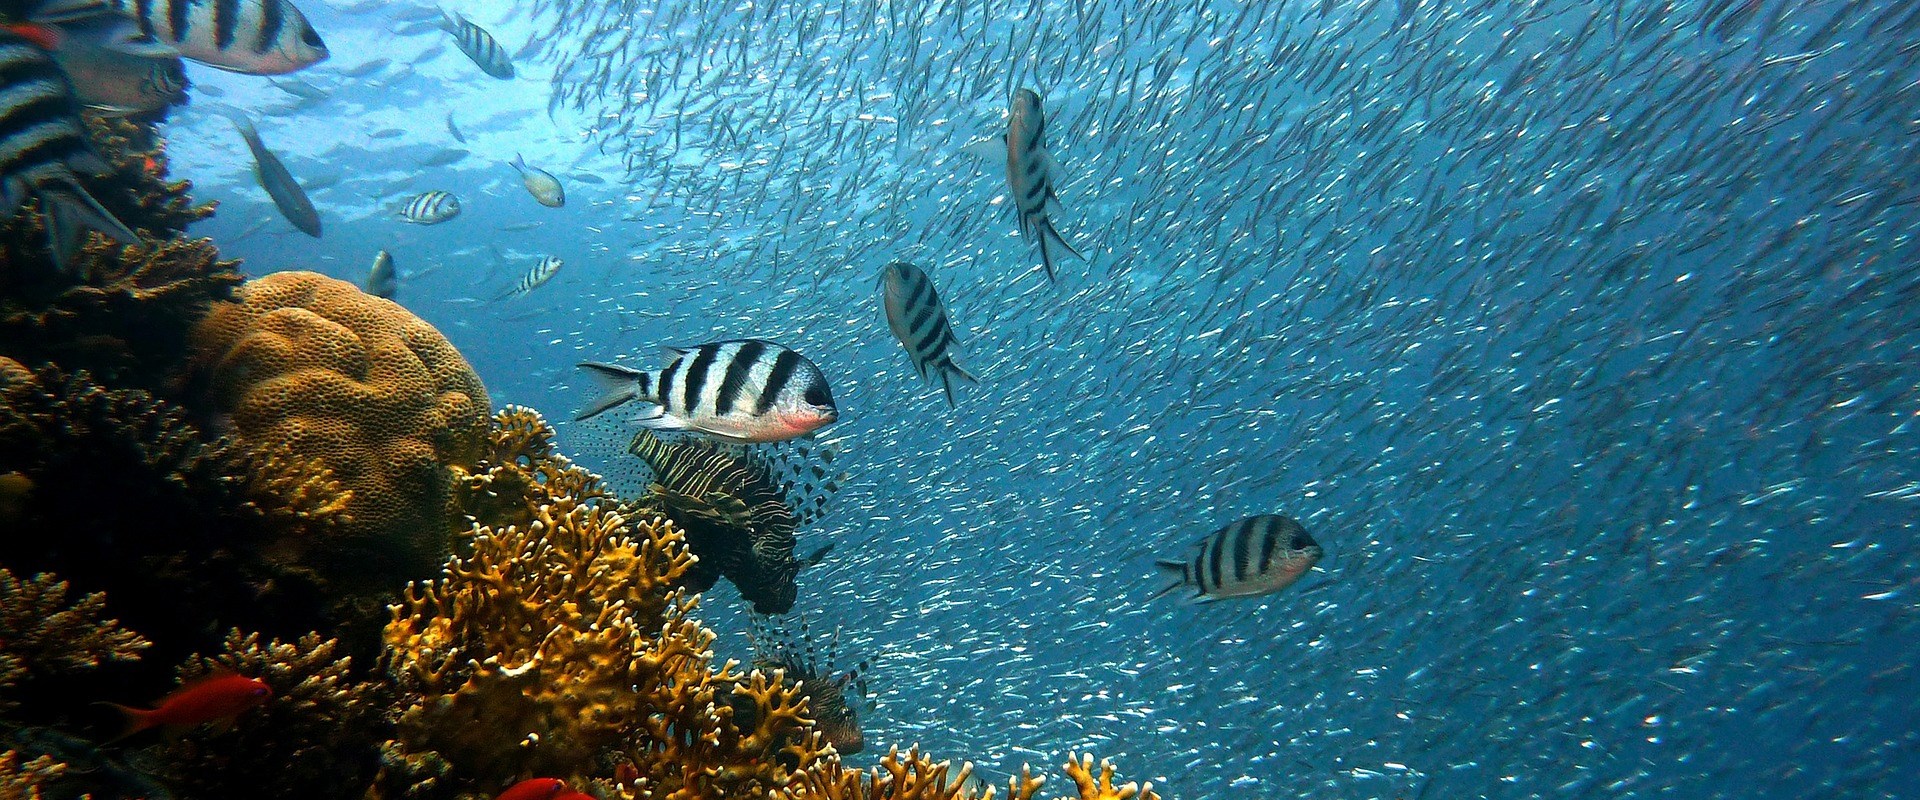 Fish swimming alongside a coral reef